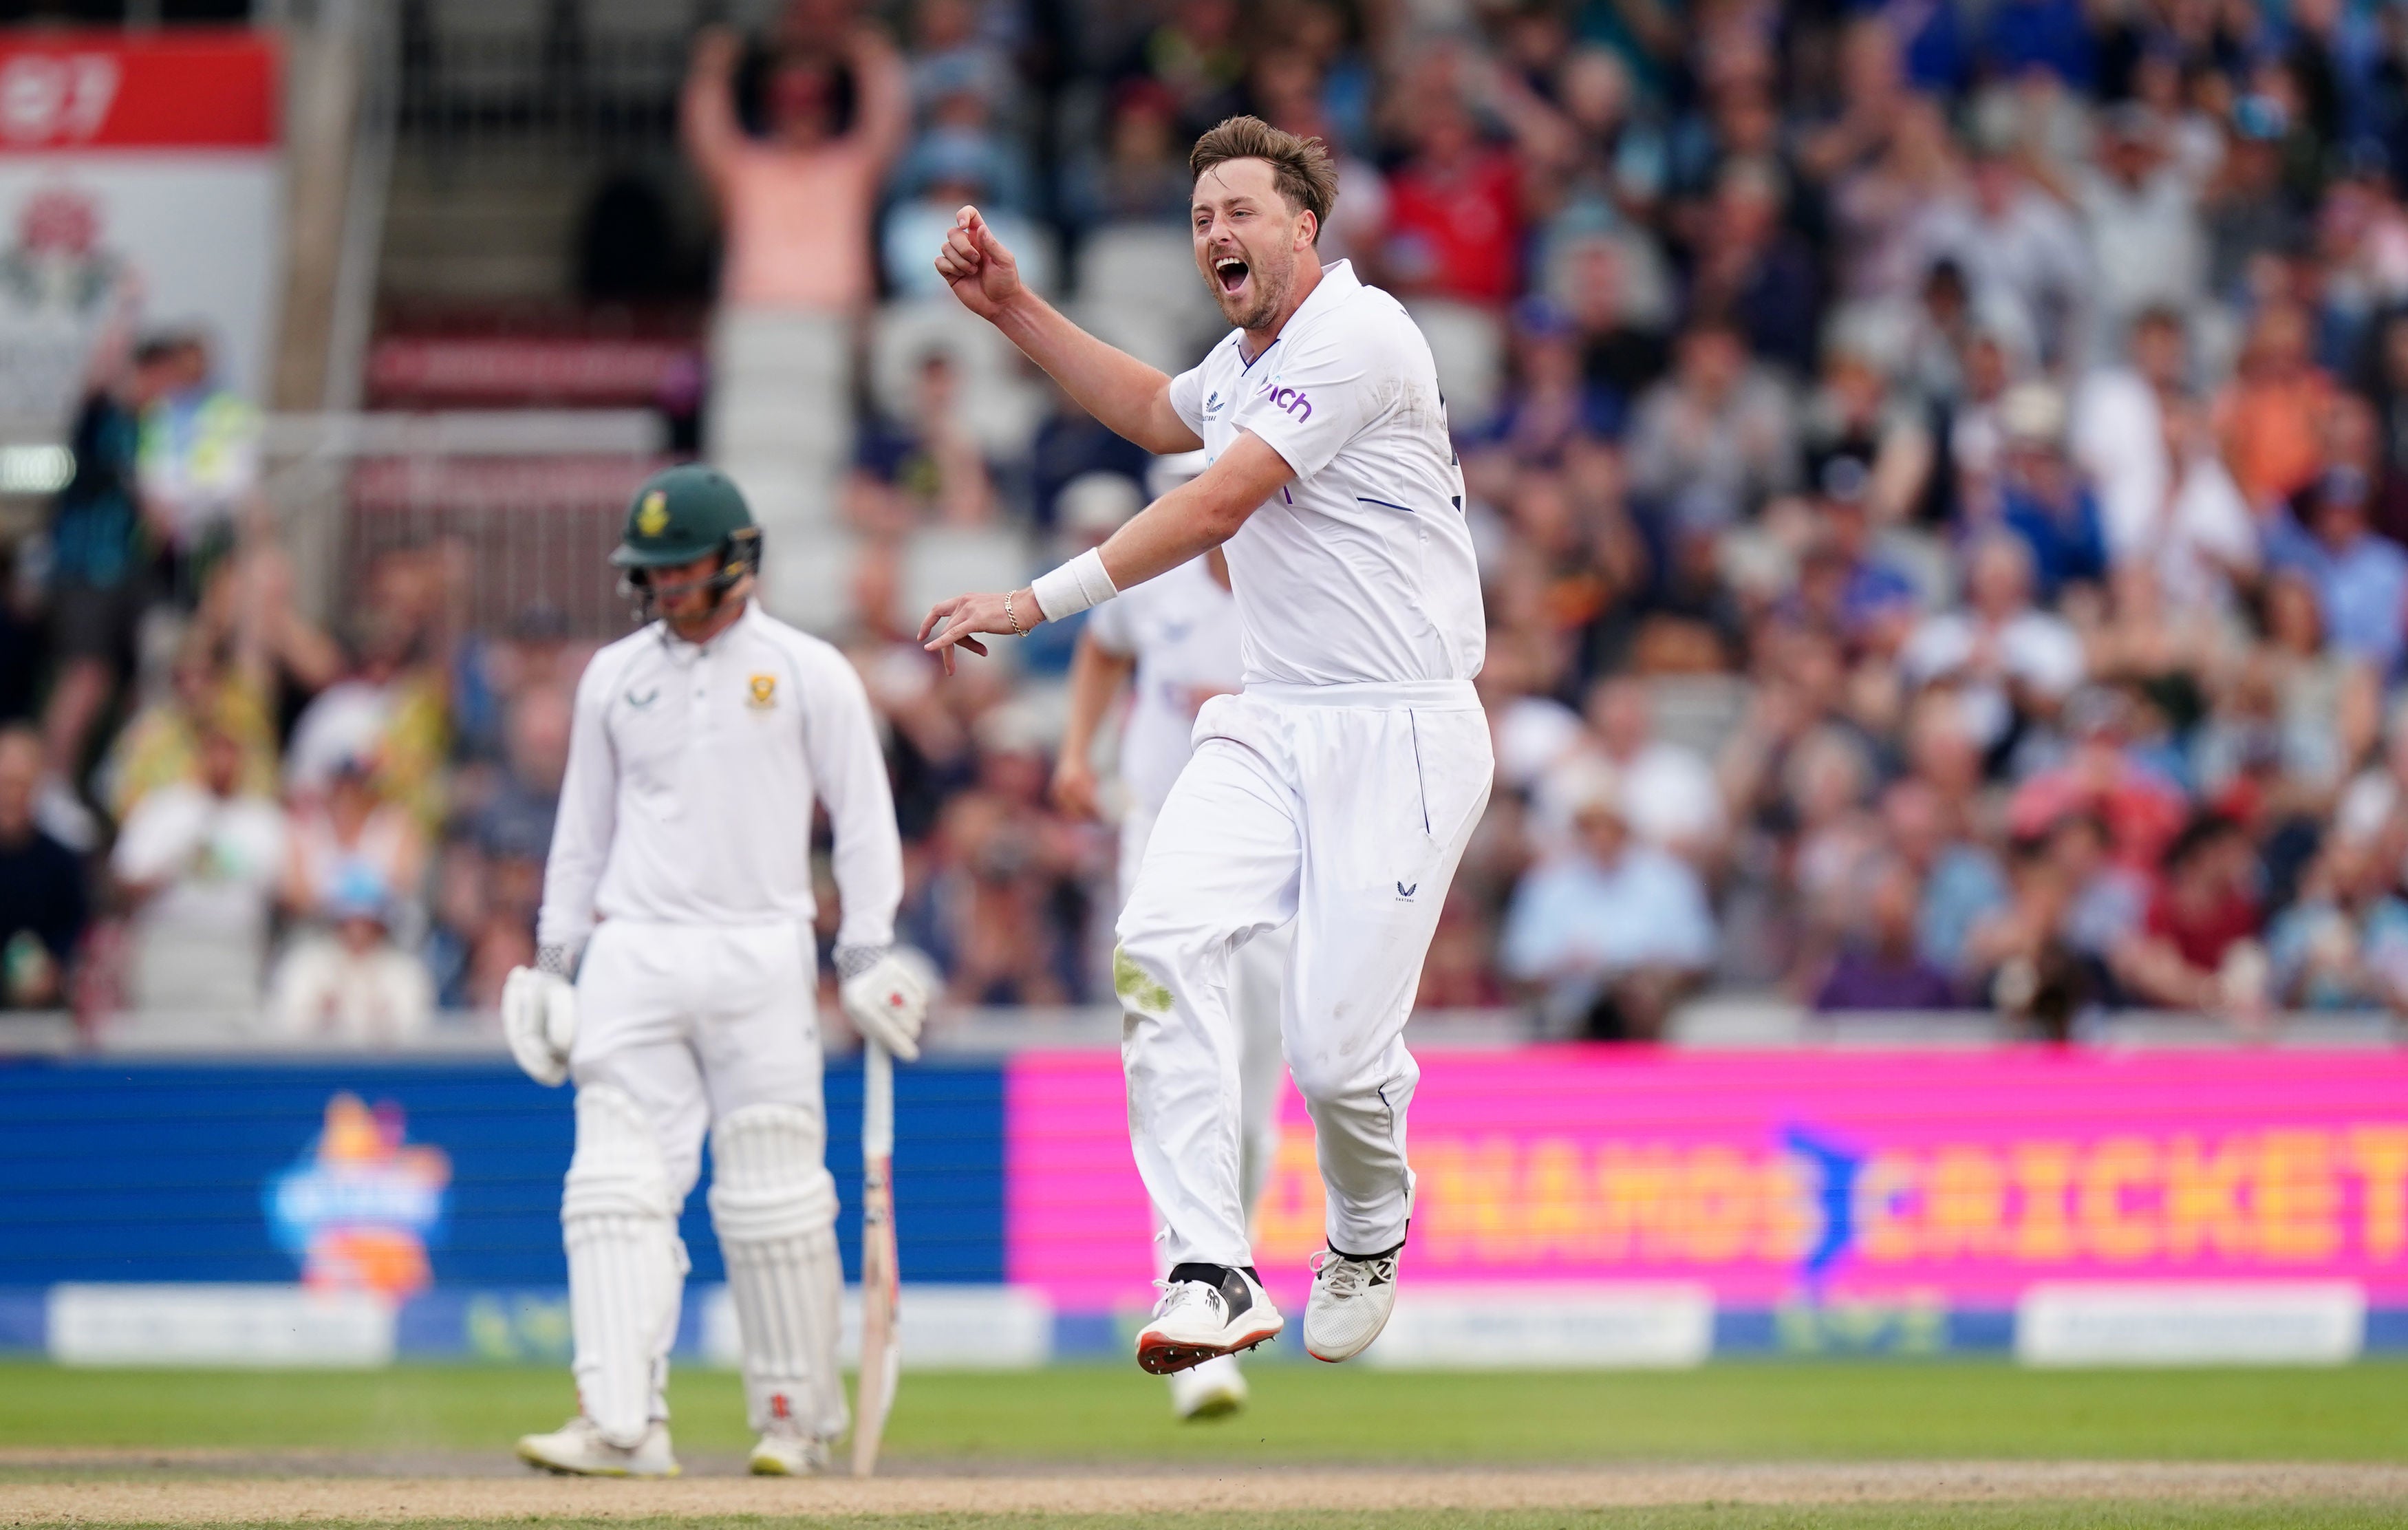 England vs South Africa LIVE Cricket result and scorecard as England win second Test at Old Trafford The Independent